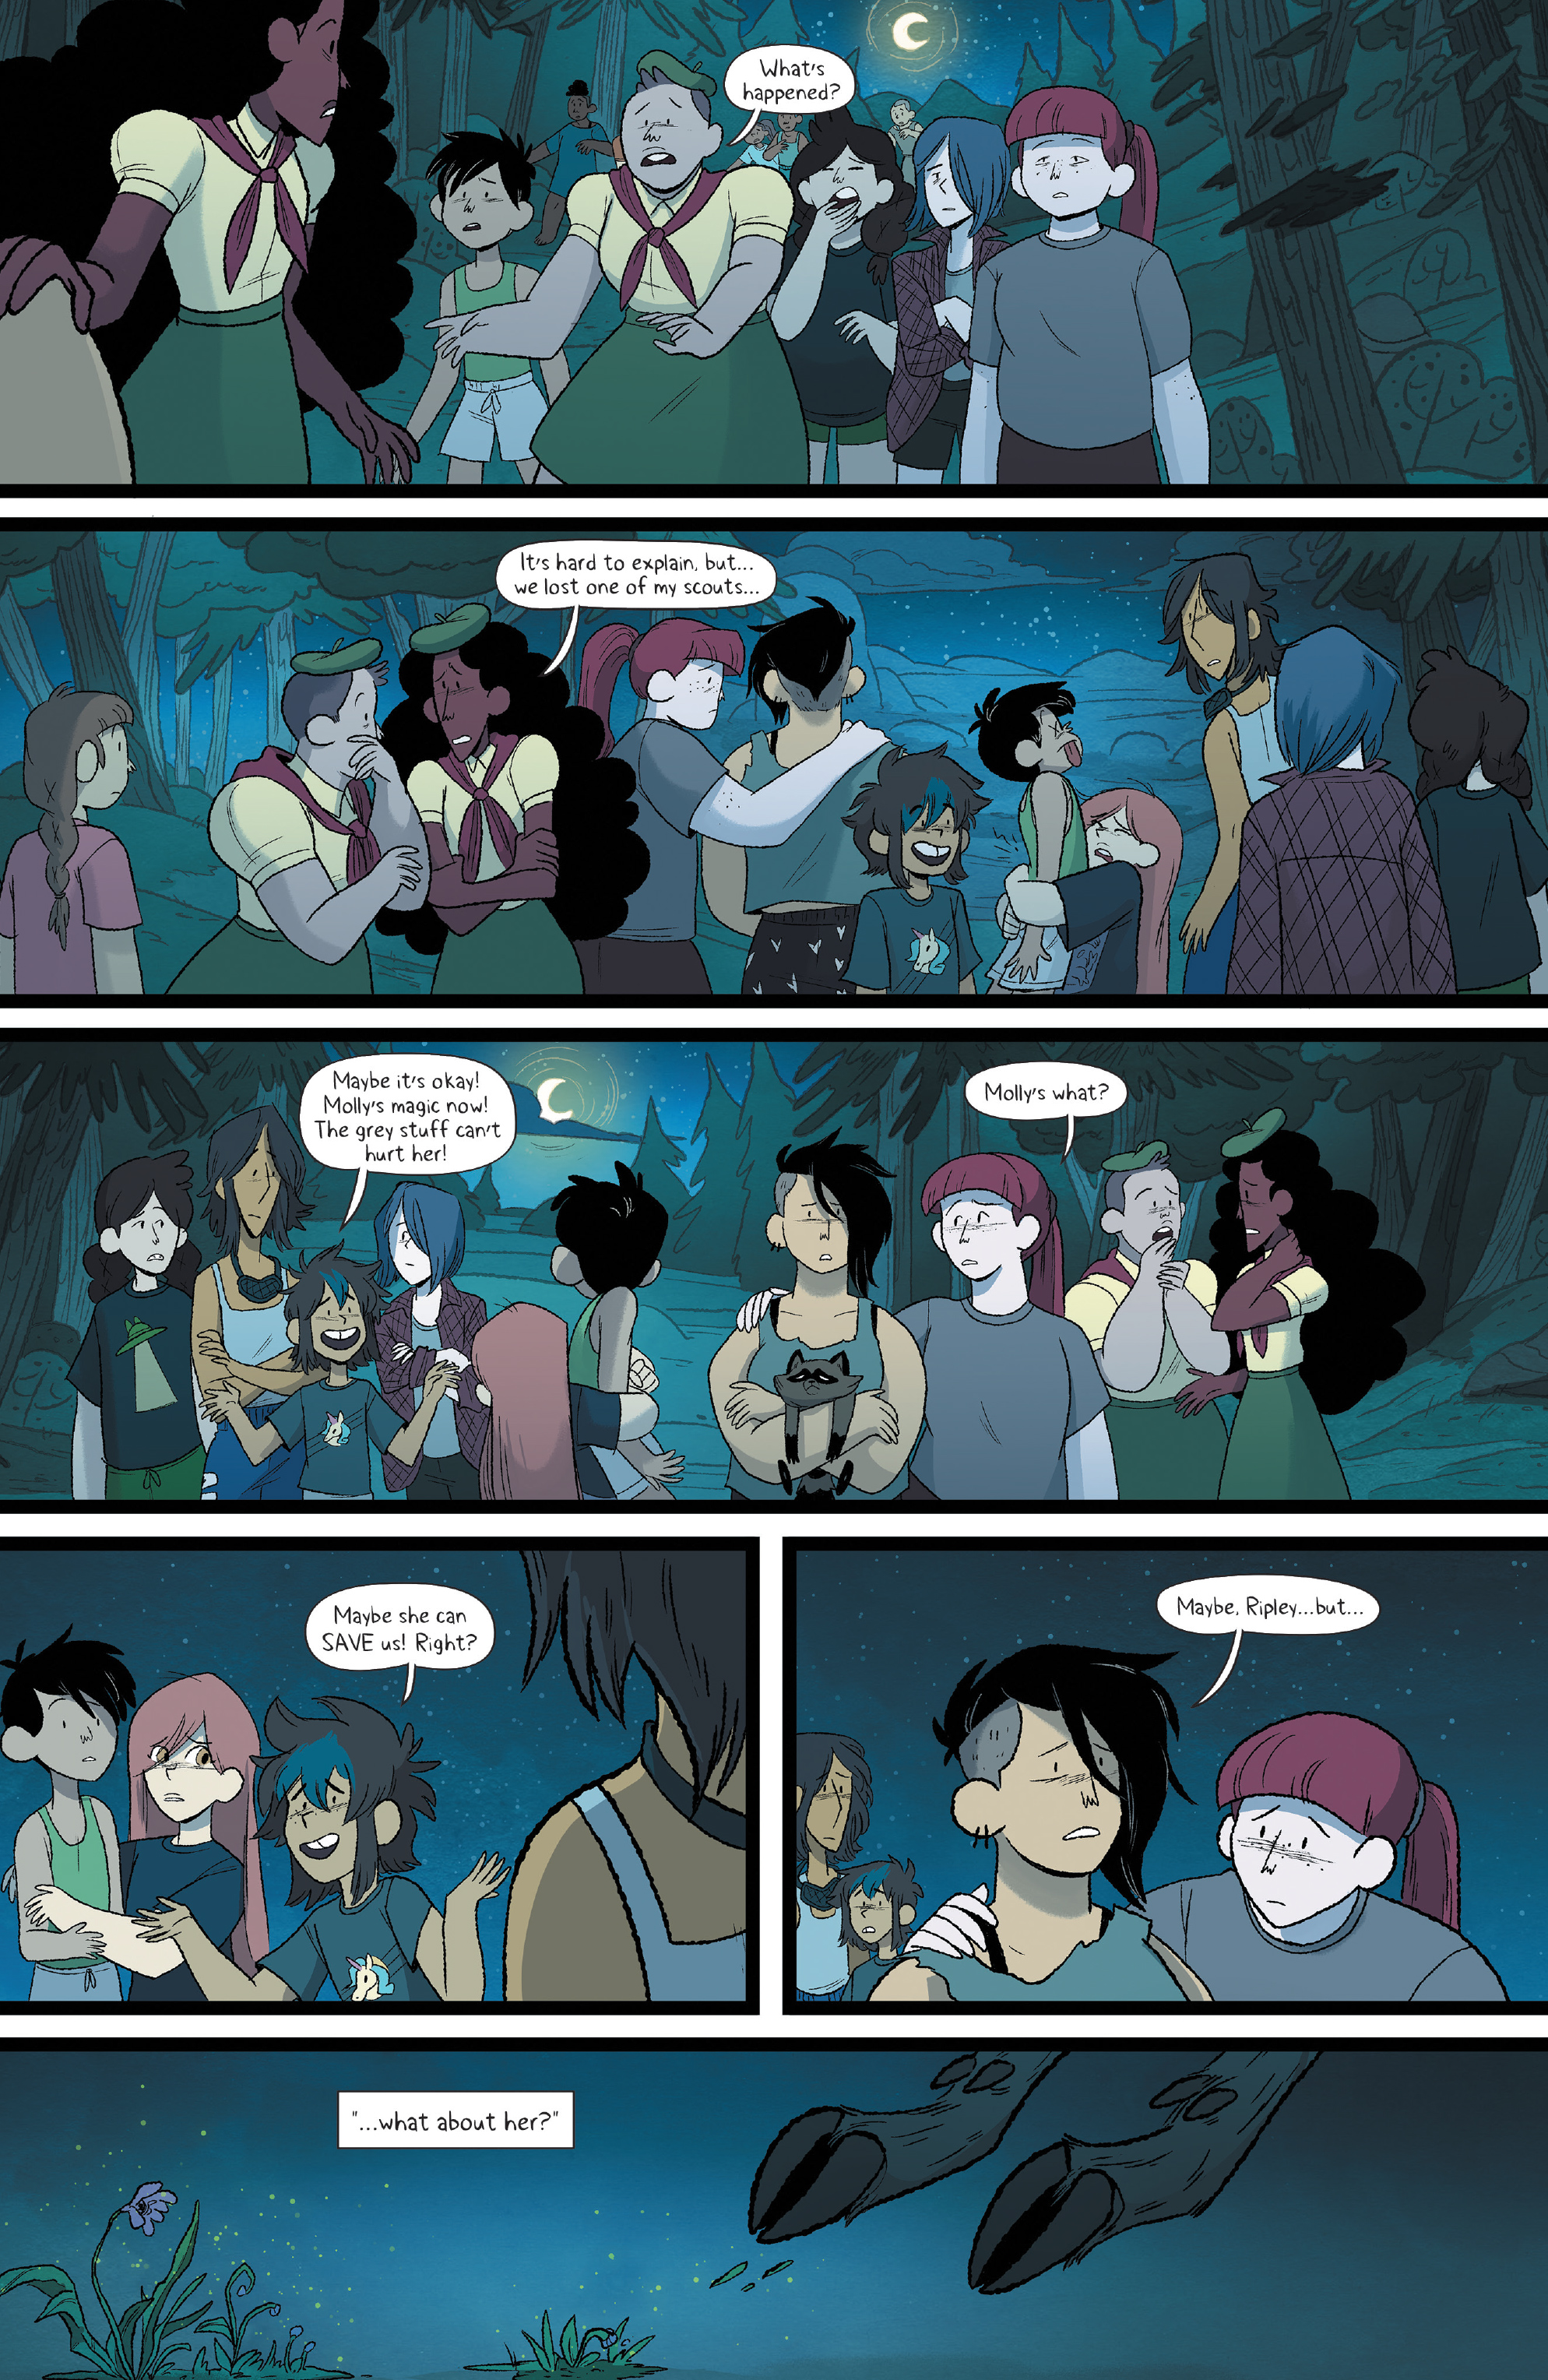 Lumberjanes: End of Summer (2020-): Chapter 1 - Page 4